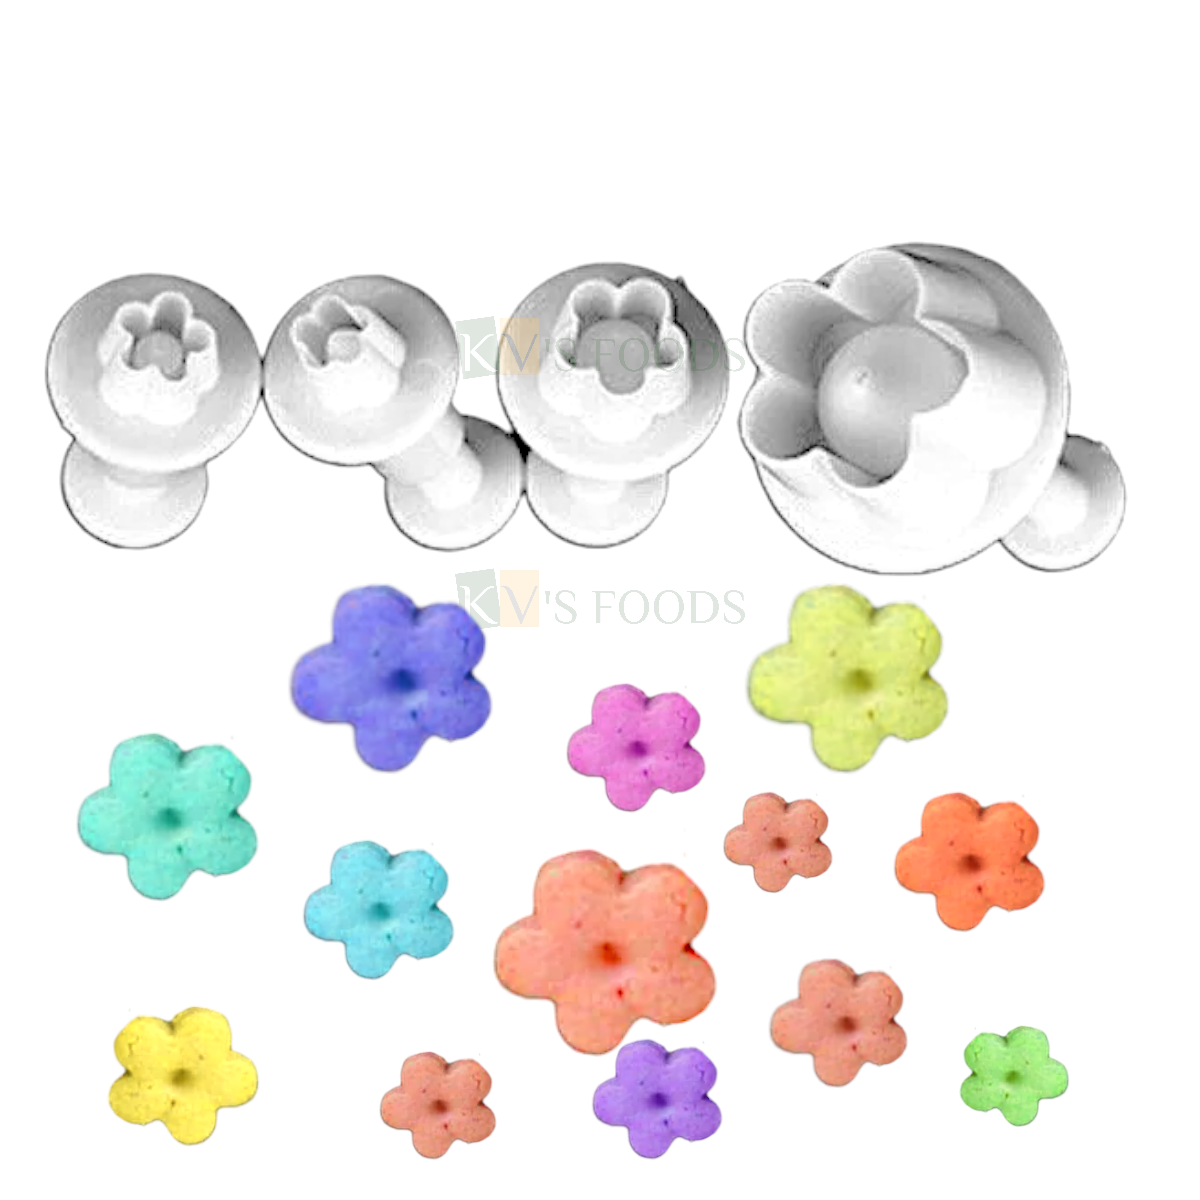 4 PCS White Plum Flower Fondant Plunger Cutters Stamps, Molds, Embossing Spring Mold Printed Presses Impression Biscuits Chocolates Pancake Cookies Cheese Pastry, Wedding Anniversary Cakes Decorations